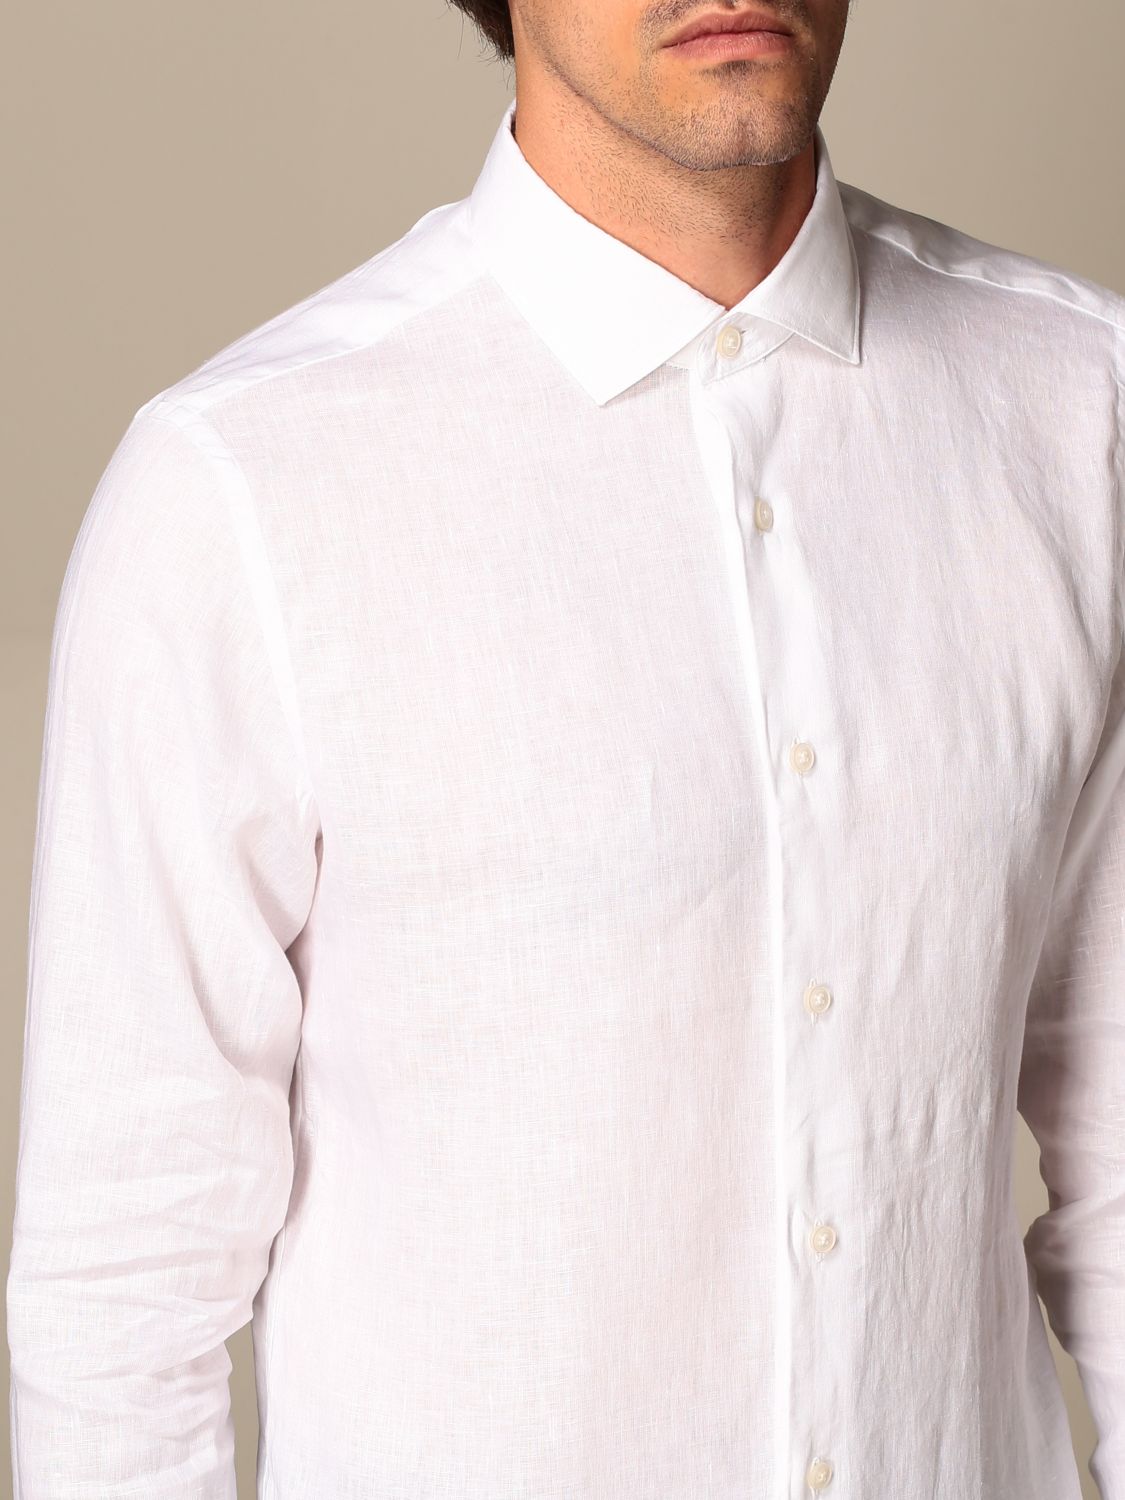 Z Zegna Outlet: linen shirt with French collar - White | Shirt Z Zegna ...